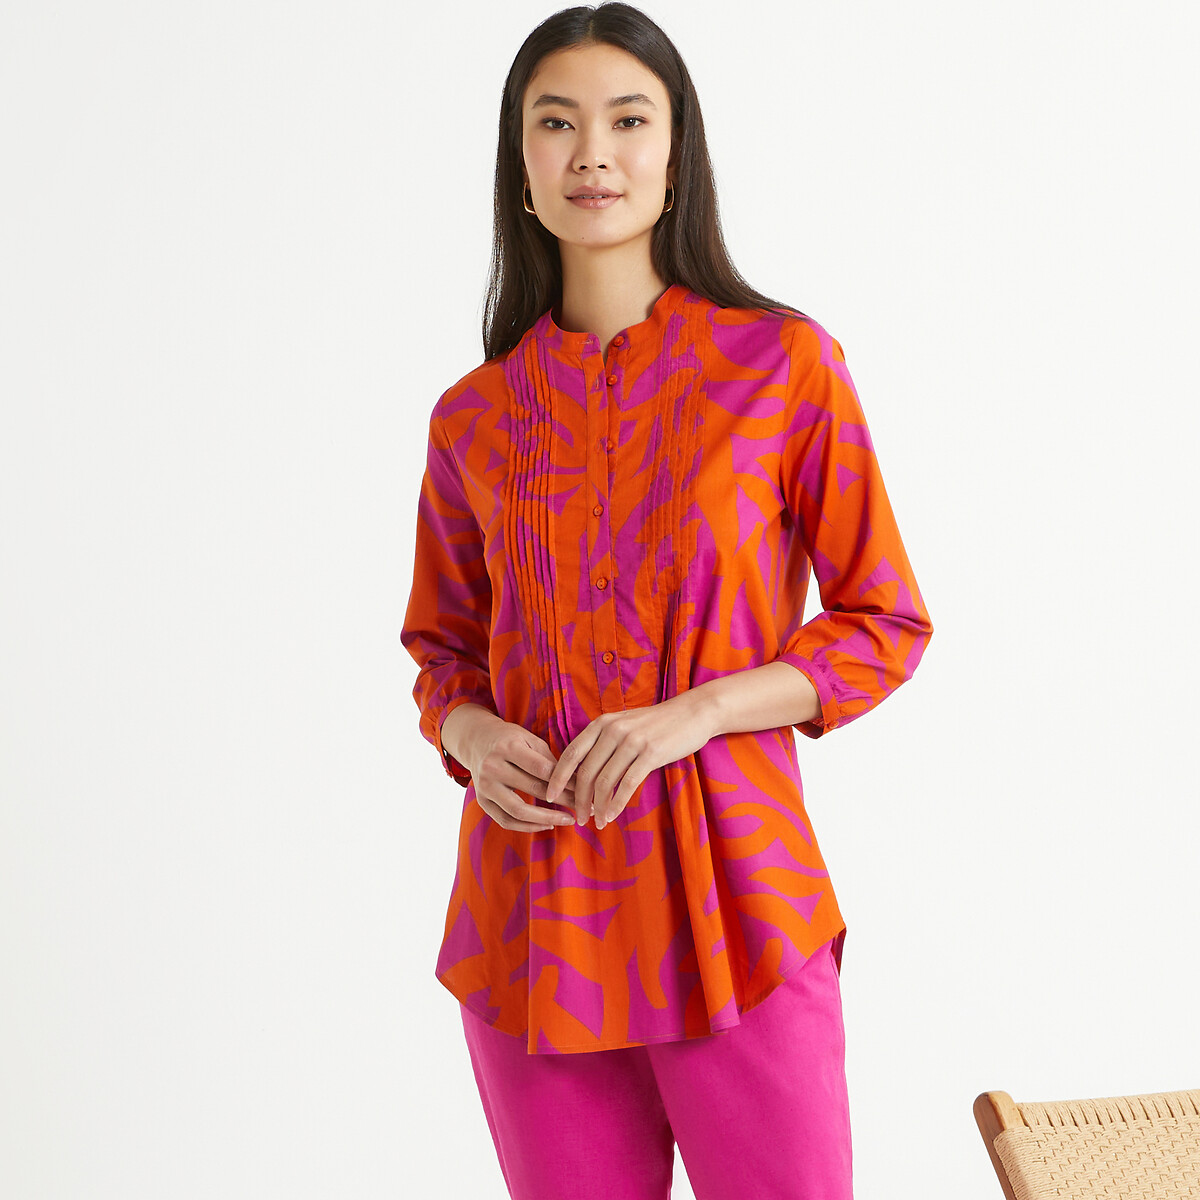 Image of Graphic Print Cotton Tunic with 3/4 Length Sleeves